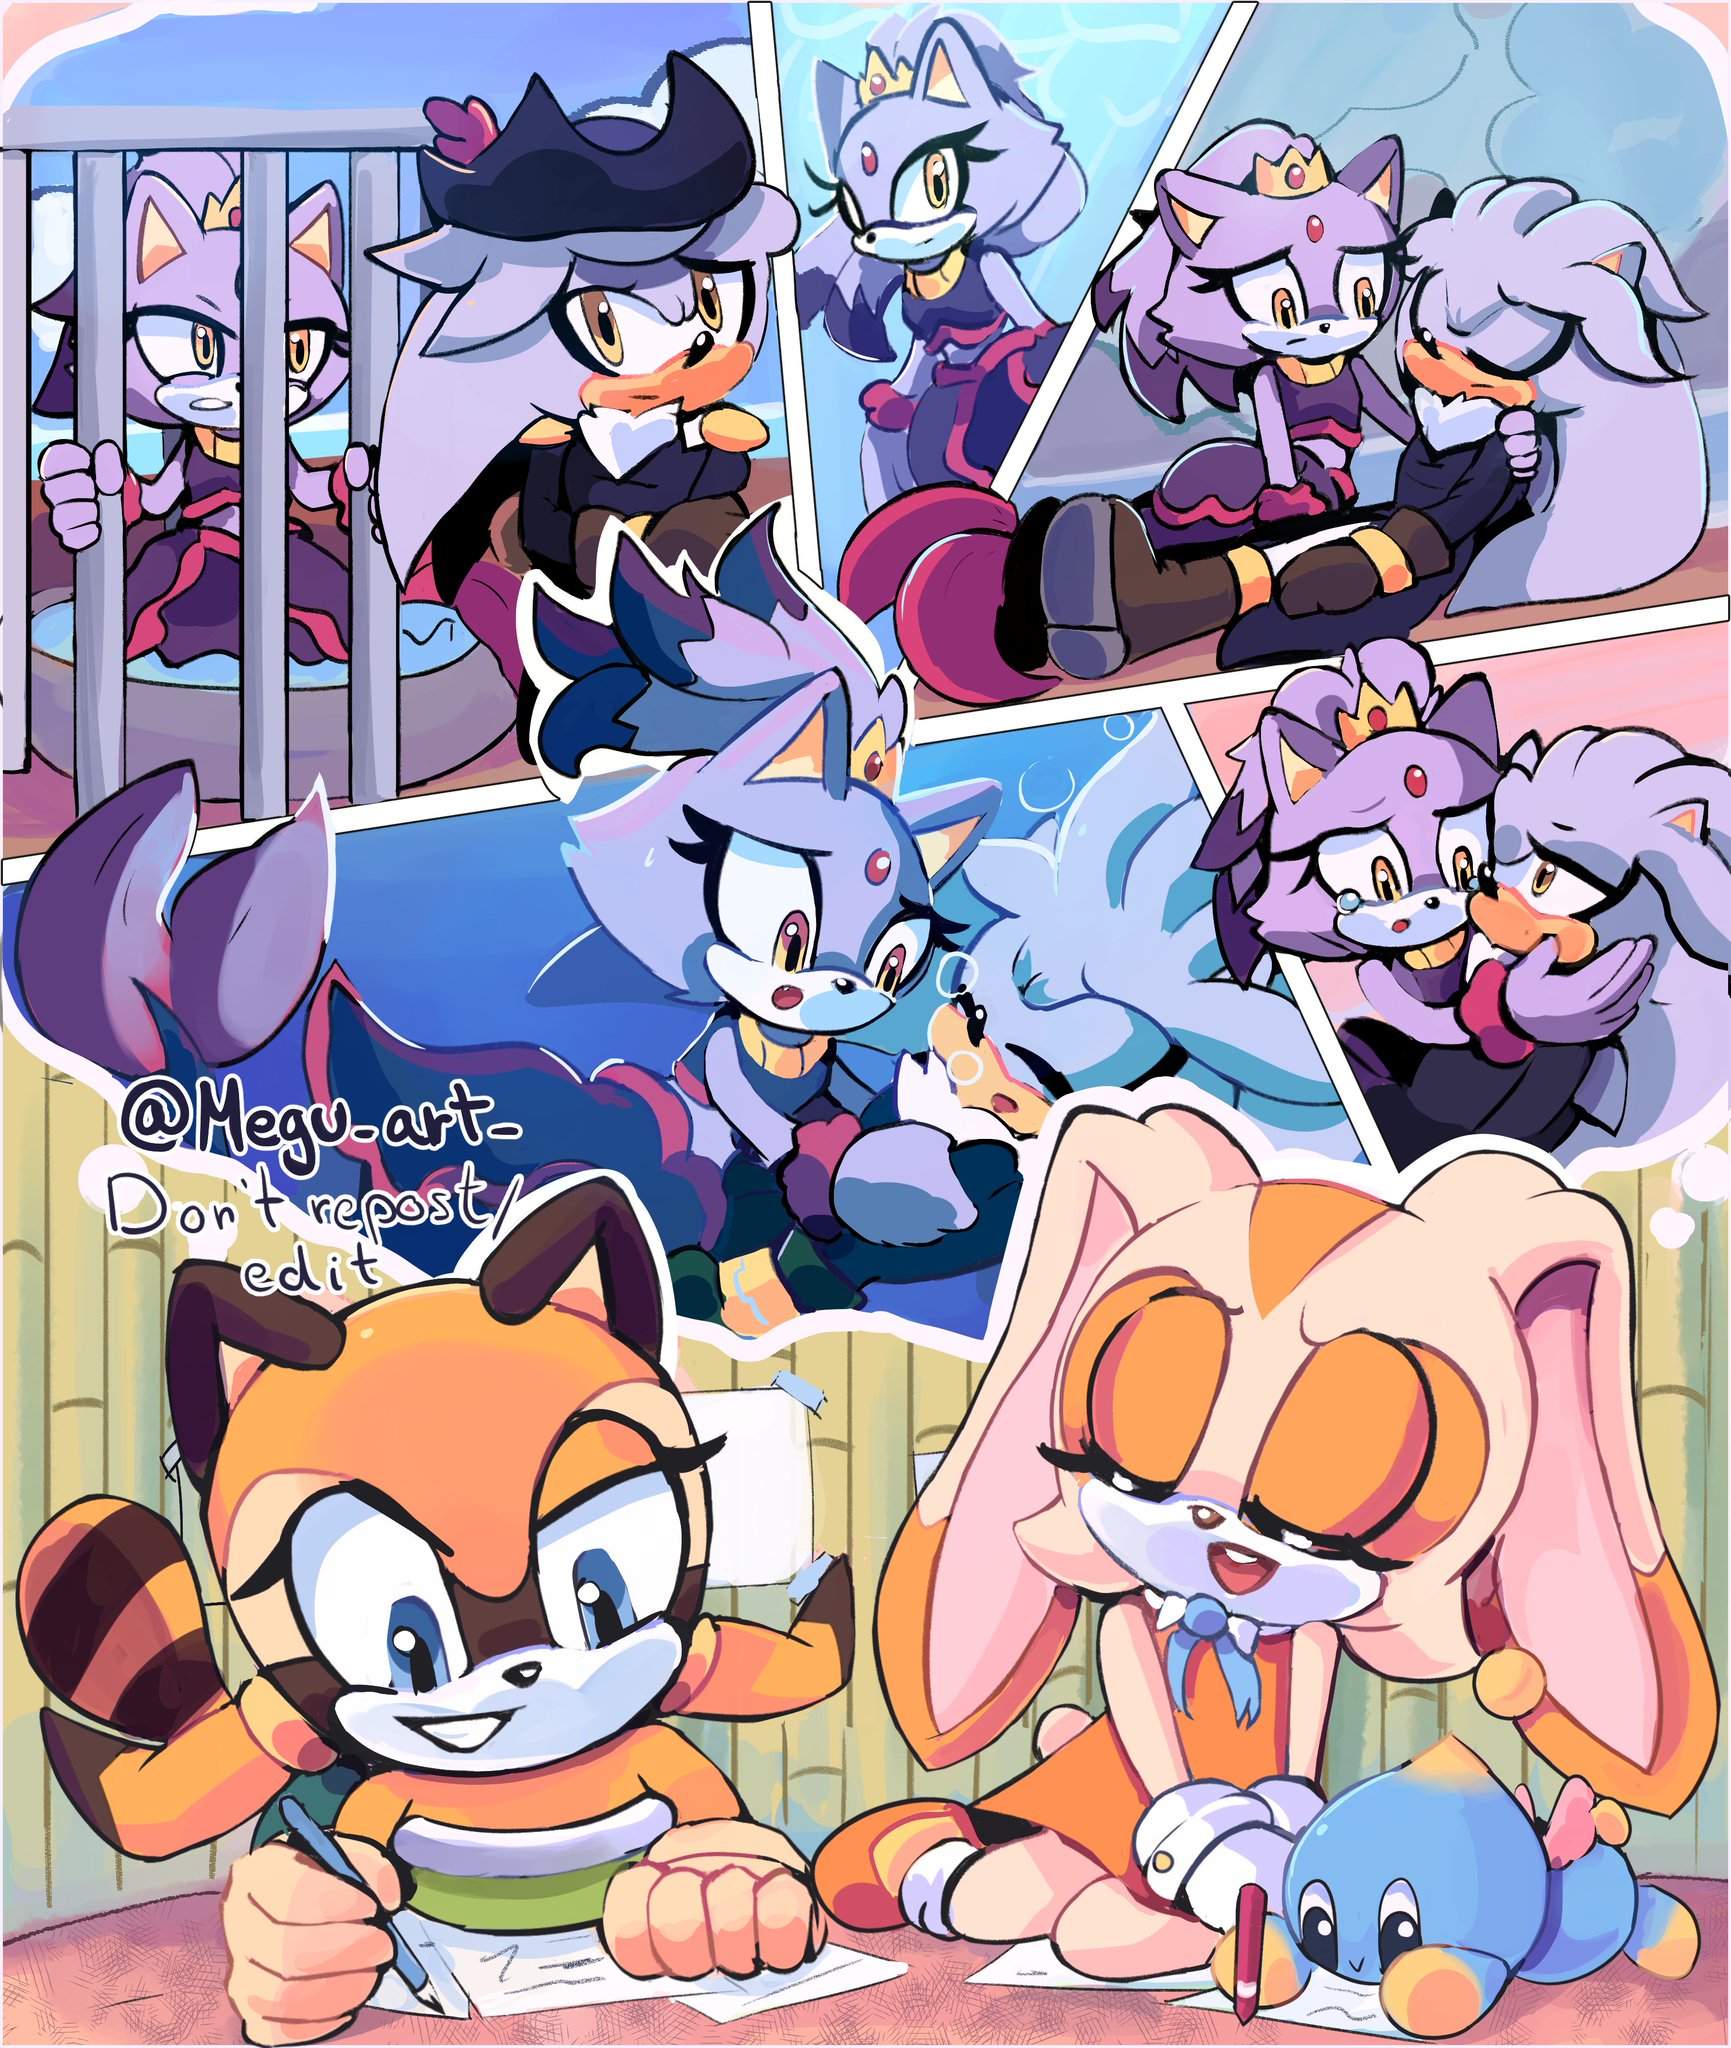 Megu on X: Sonamy/ Silvaze week day 4: Future Two kinds of families 🍝  (Click to see the full drawings!) #SonamySilvazeweek2021   / X